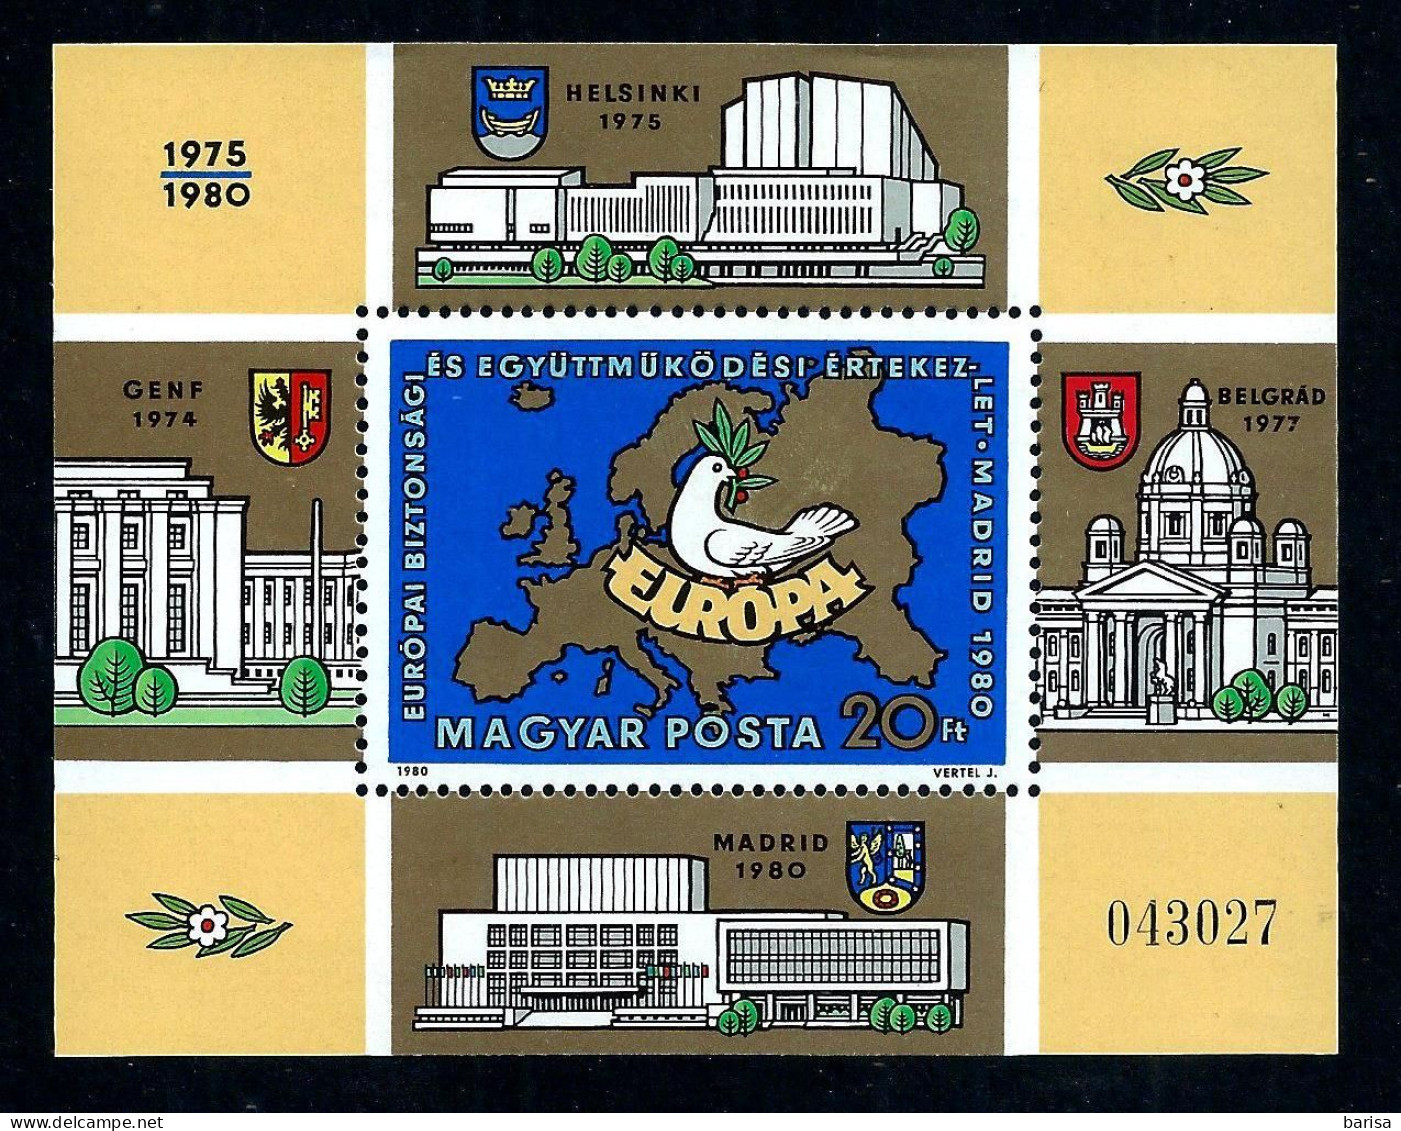 (A5) Hungary 1980: Conference On European Security And Cooperation (CSCE) - Madrid ** MNH - Idées Européennes